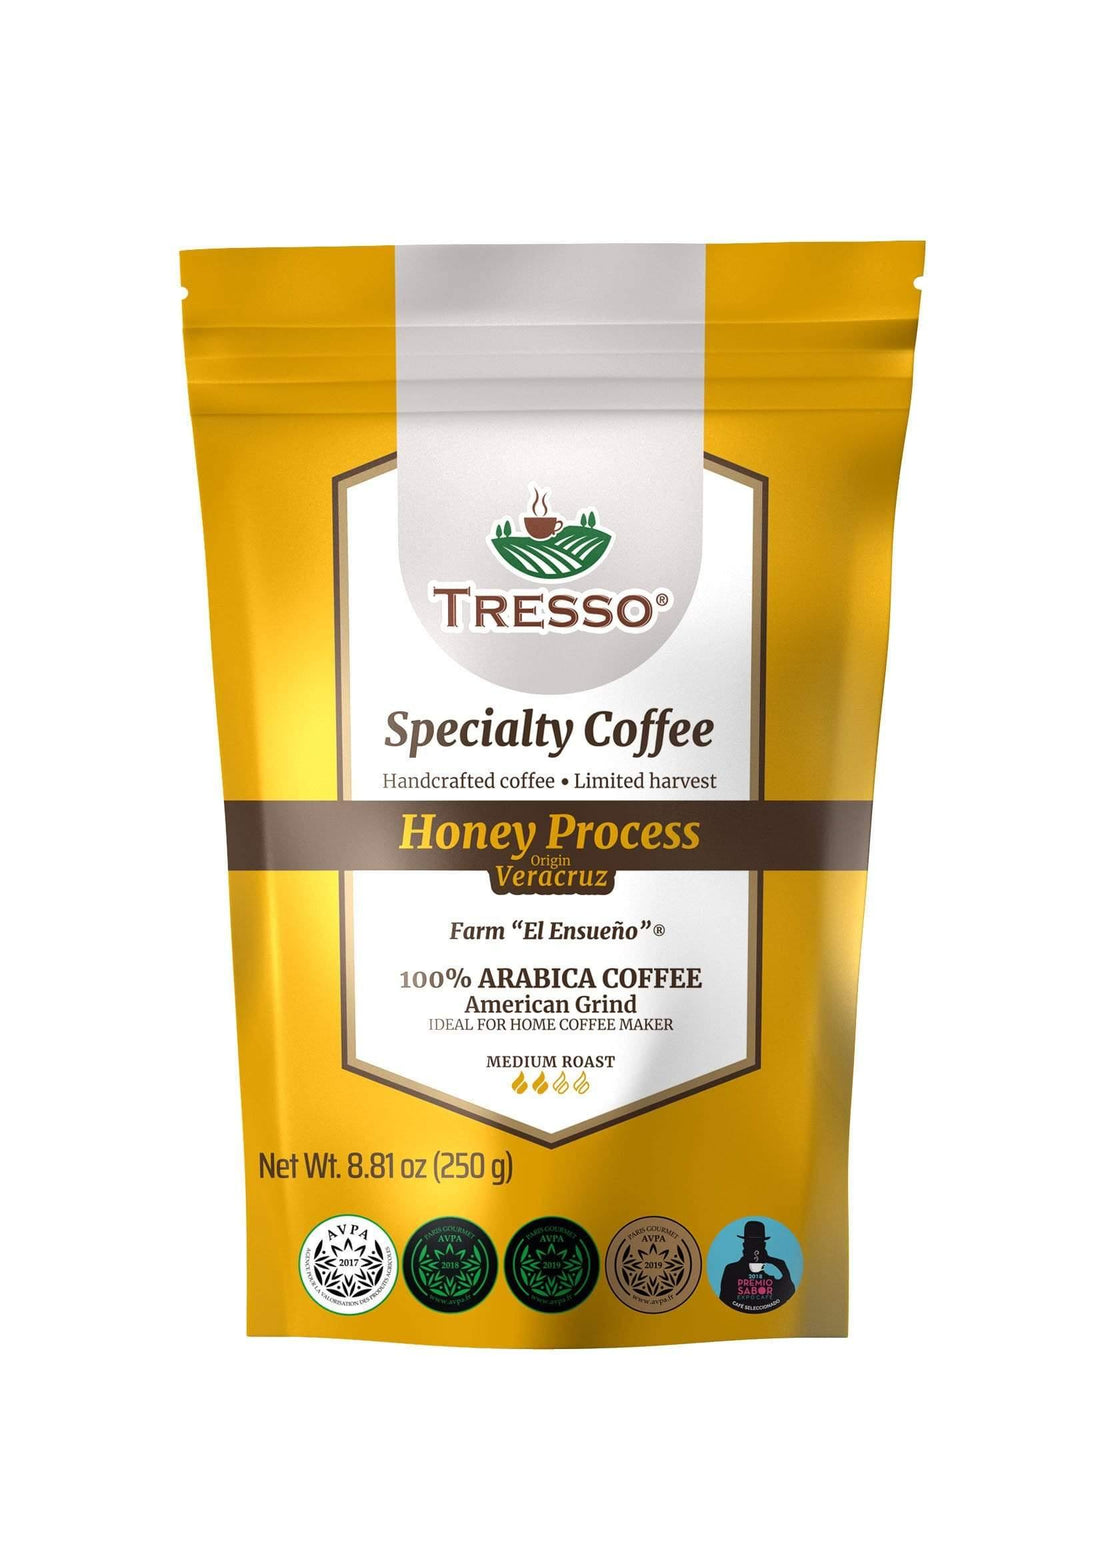 &quot;TRESSO Specialty Coffee, Limited Harvest, Honey Process and Handcrafted Coffee, Medium Roast, American Grind, 8.81Oz&quot; TRESSO® American grinder for home coffee maker/8.8 Oz 